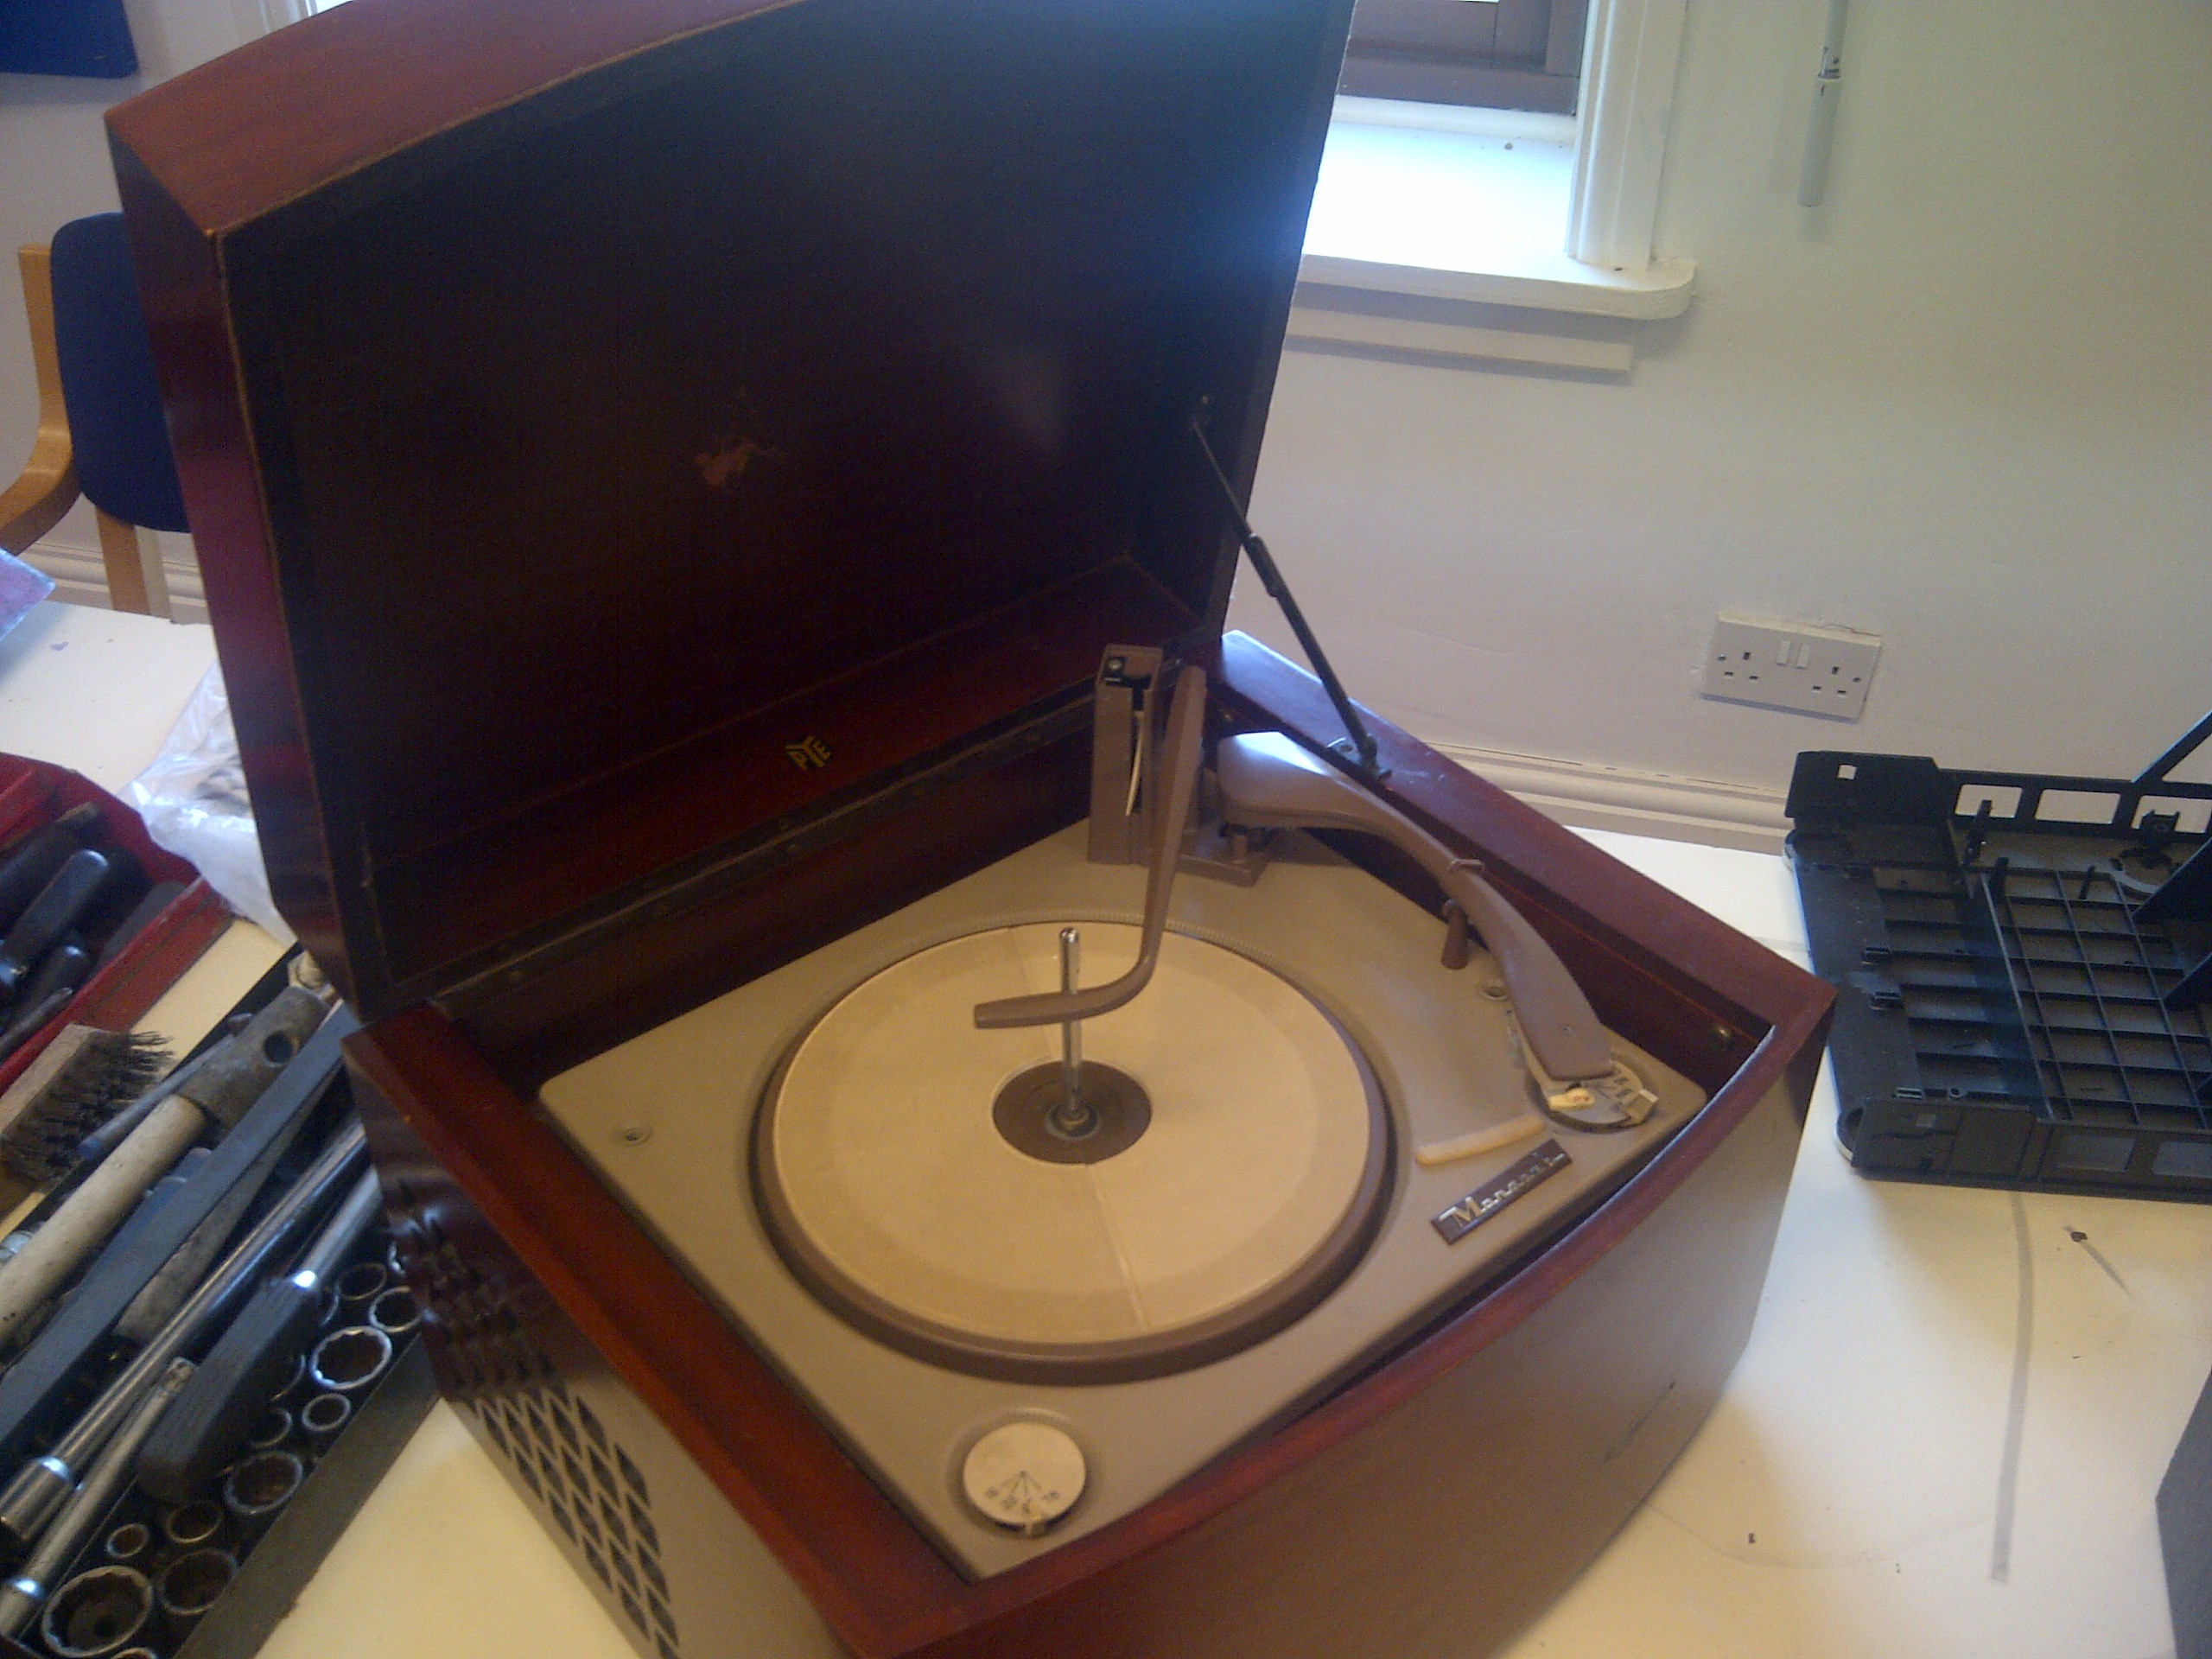 This record player had been rescued from a tip by a relative of the guy who brought it in.